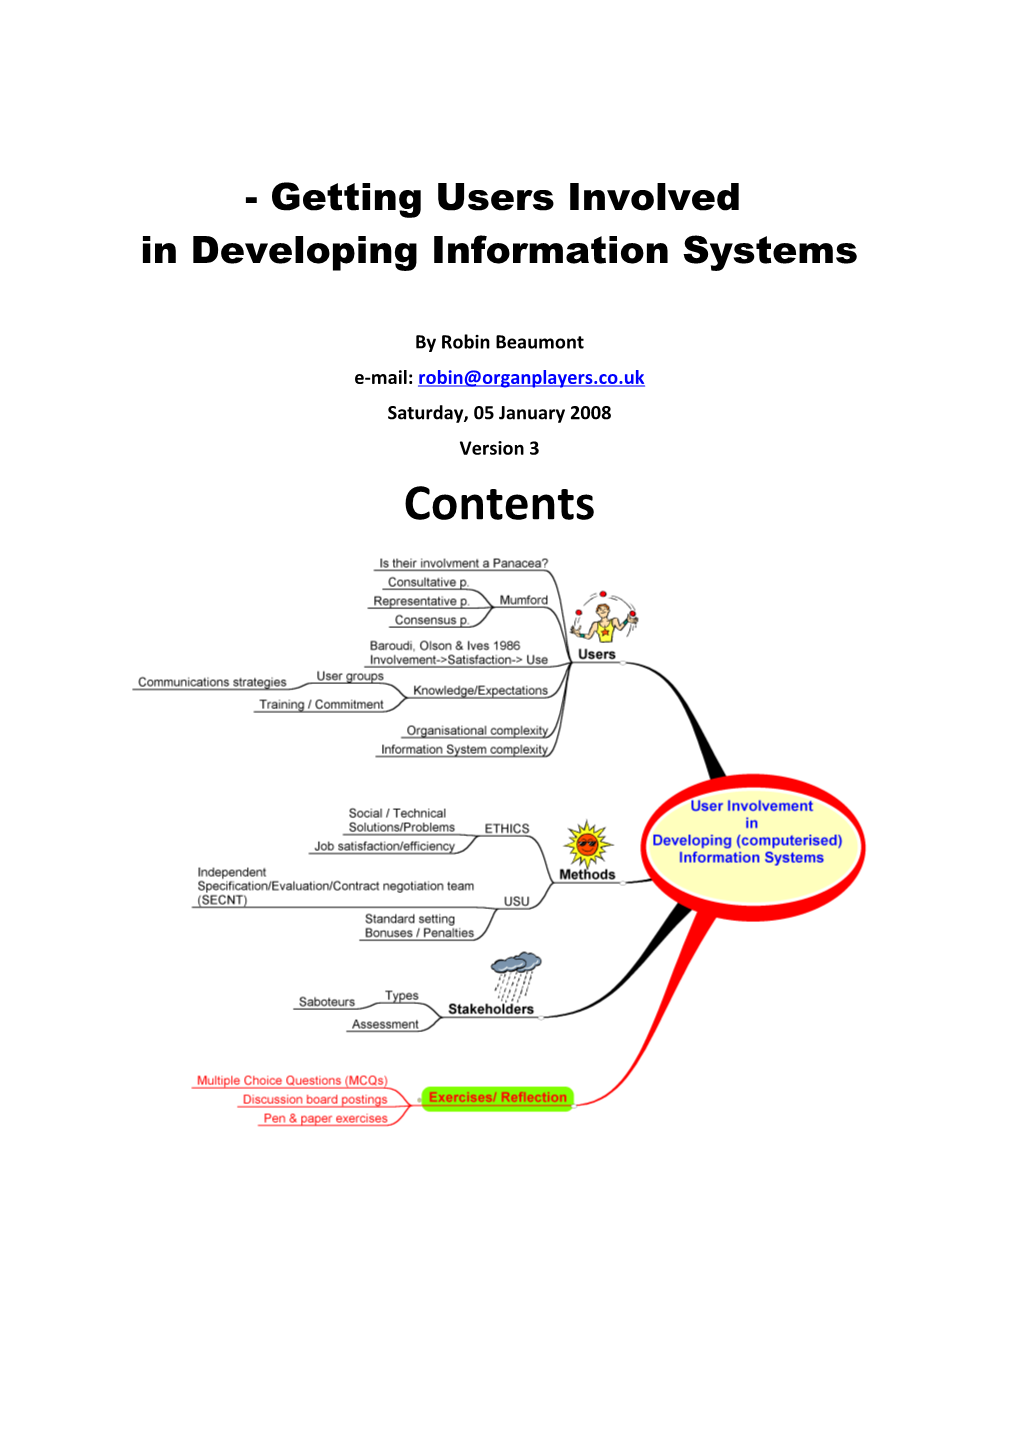 Developing Information Systems - Getting the Users Involved